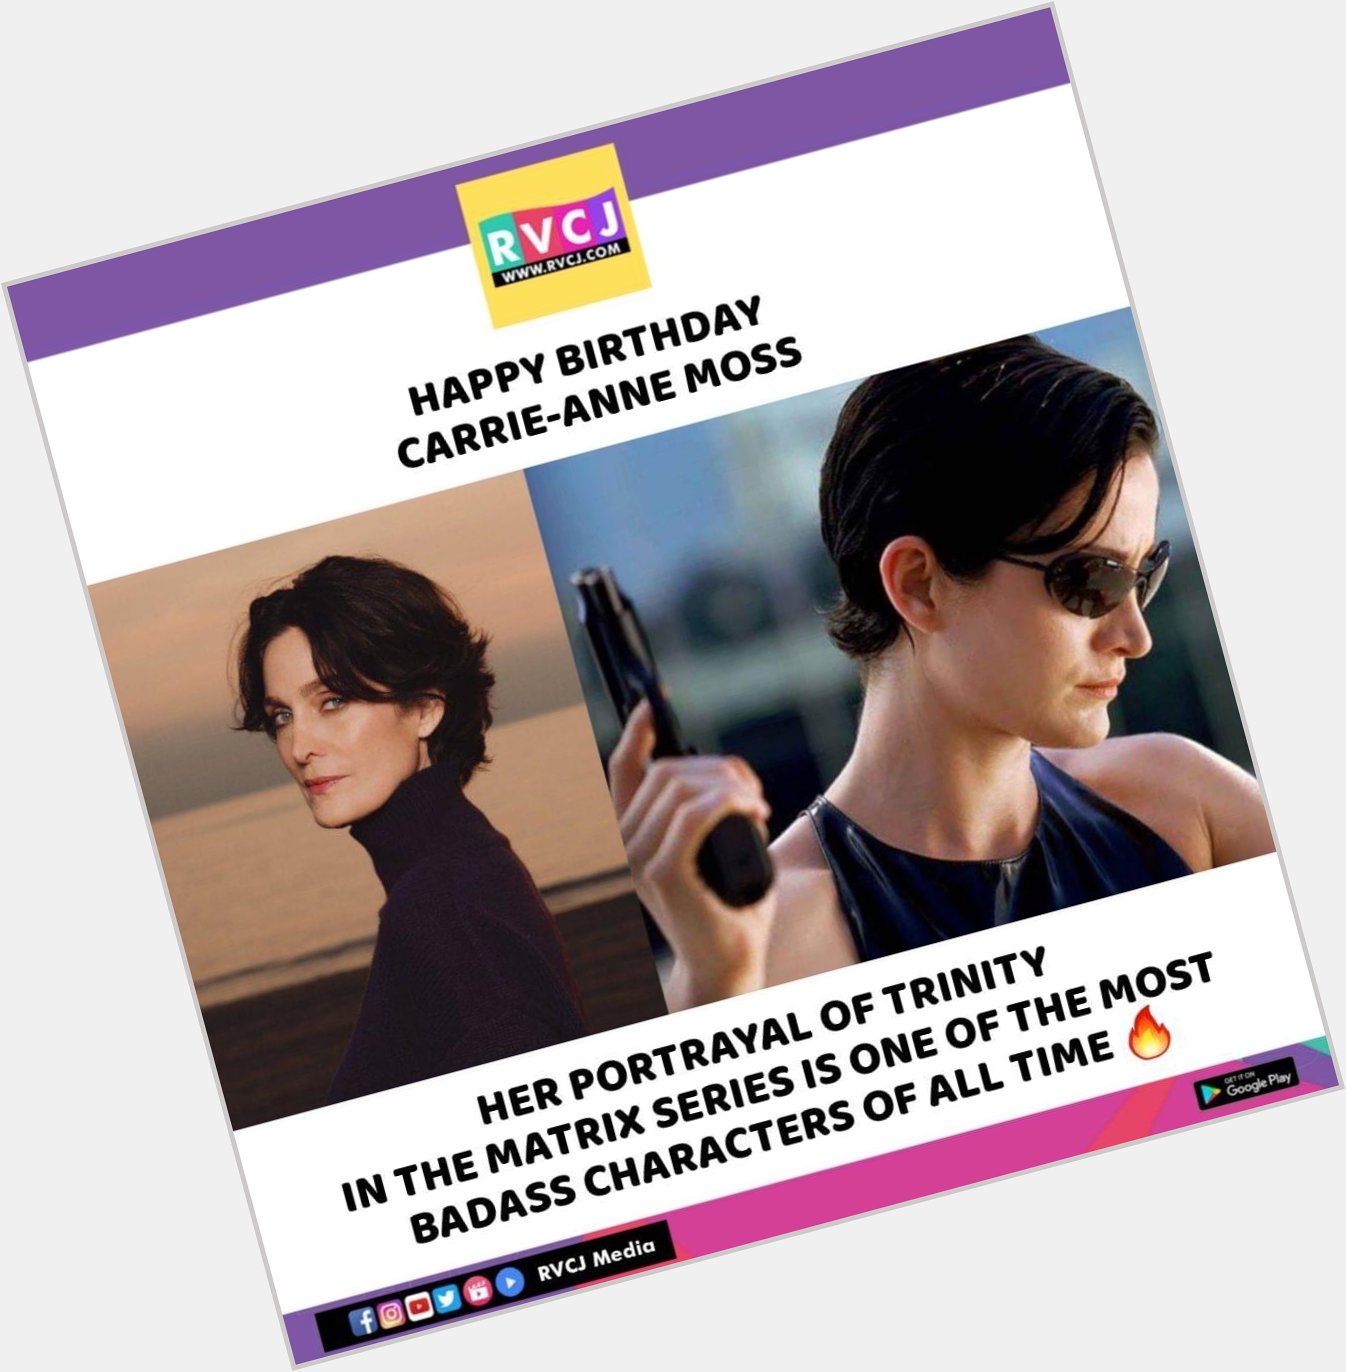 Happy Birthday Carrie-Anne Moss!     